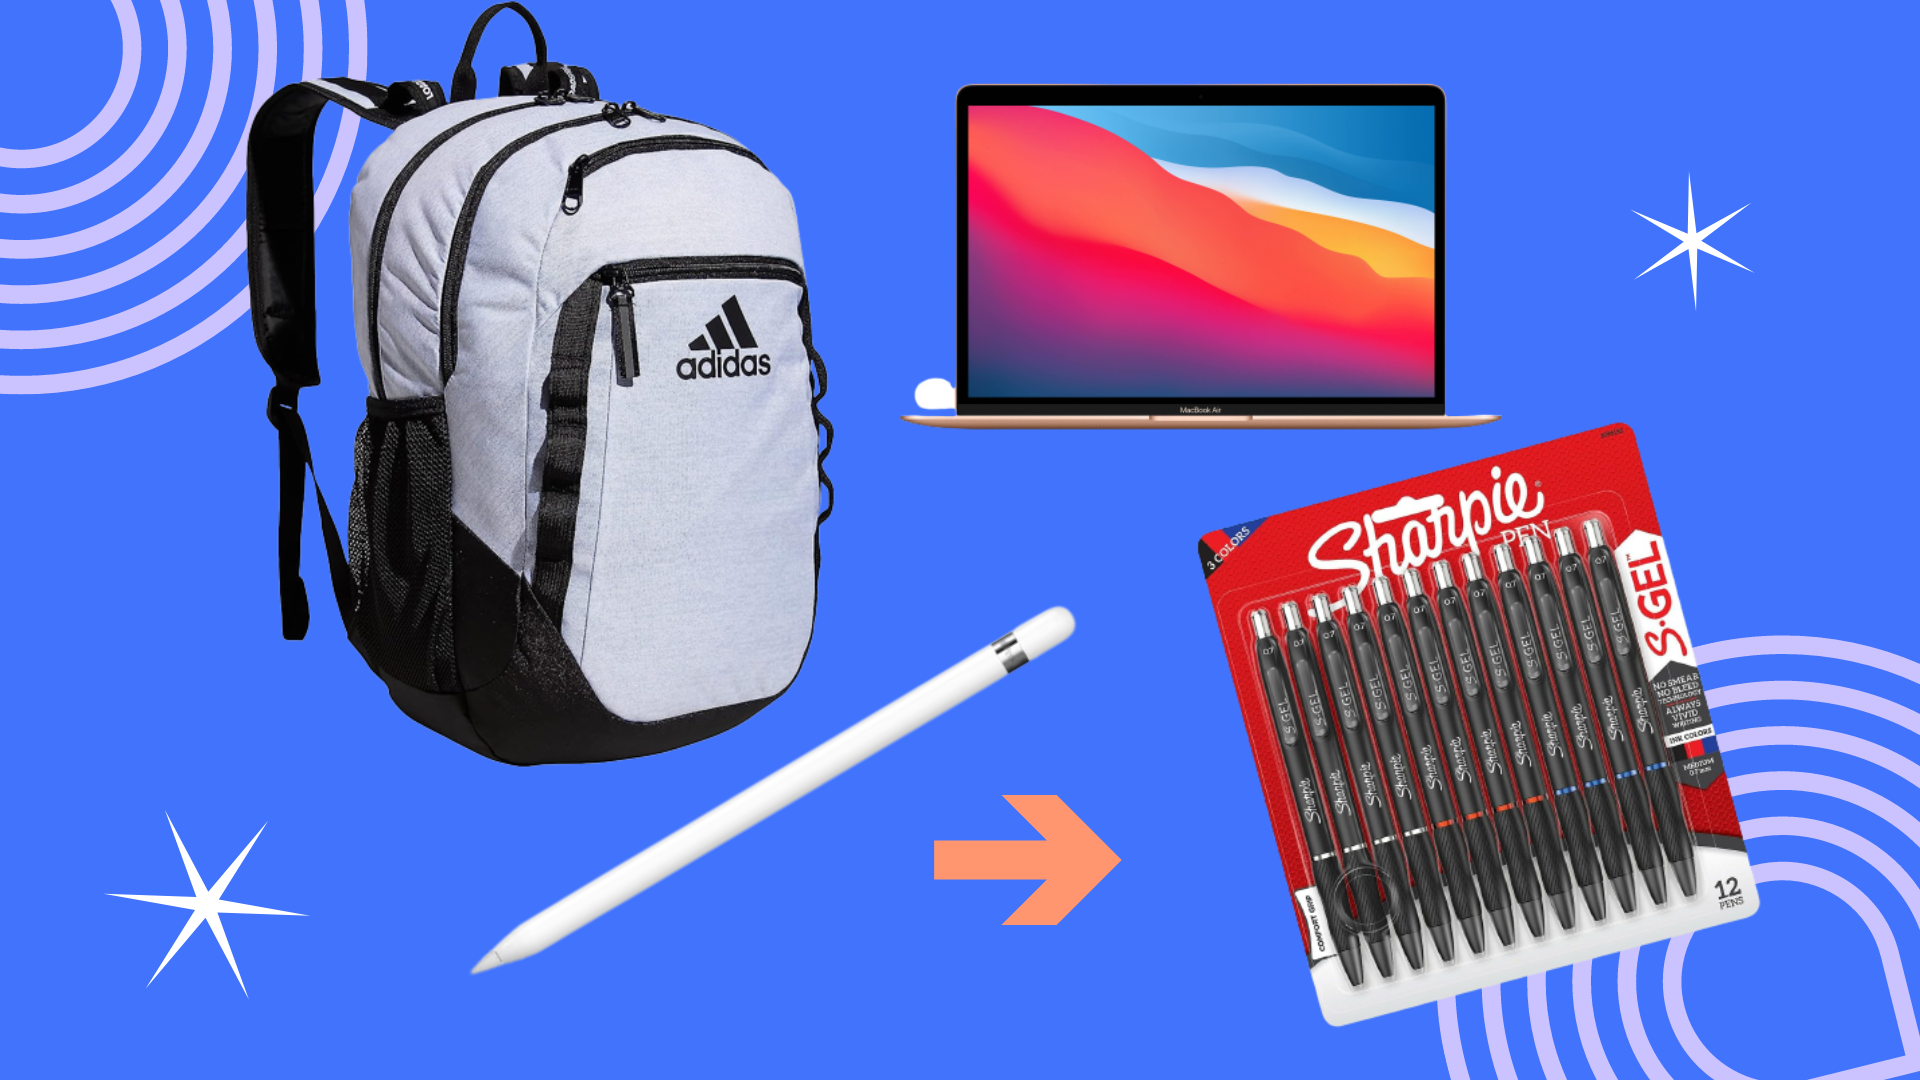 A backpack, laptop, Apple pencil, and pack of Sharpie pens overlaid on a background with patterns and design elements.